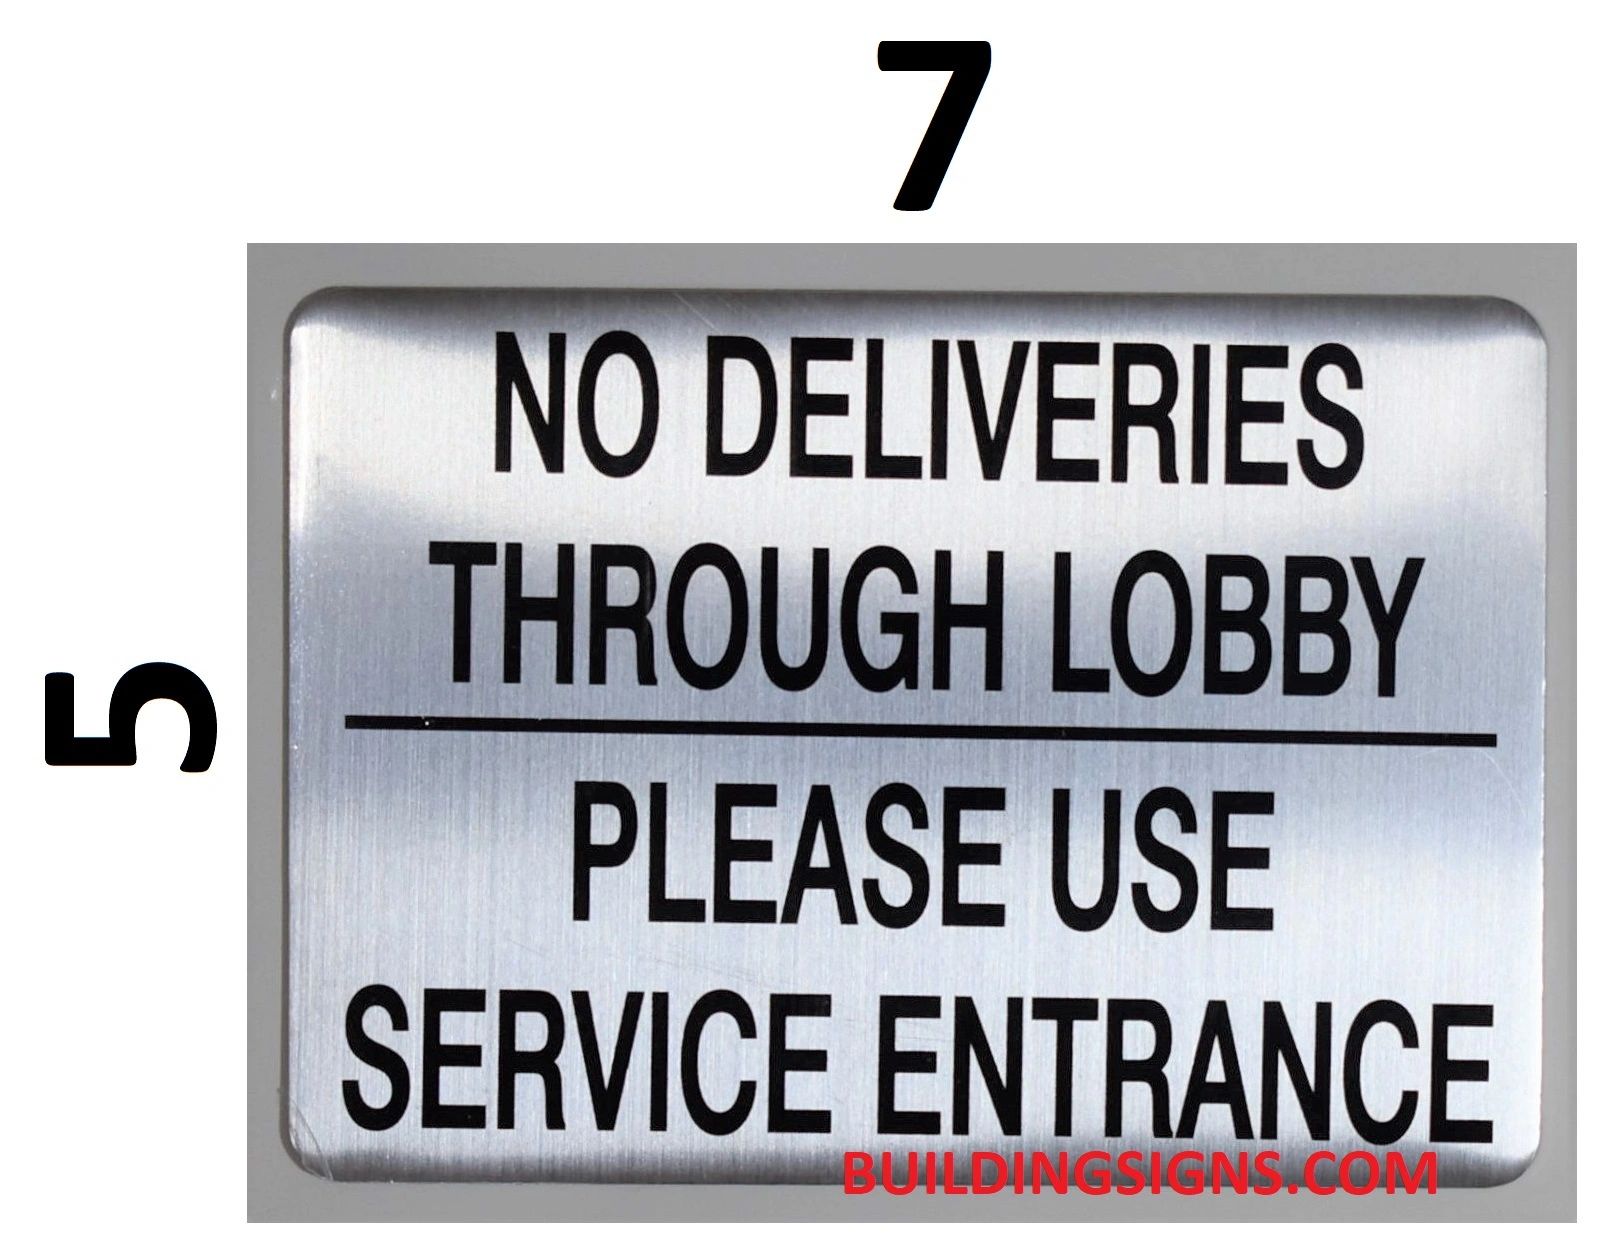 Attention No Deliveries Accepted At This Door Sign – Signs by SalaGraphics